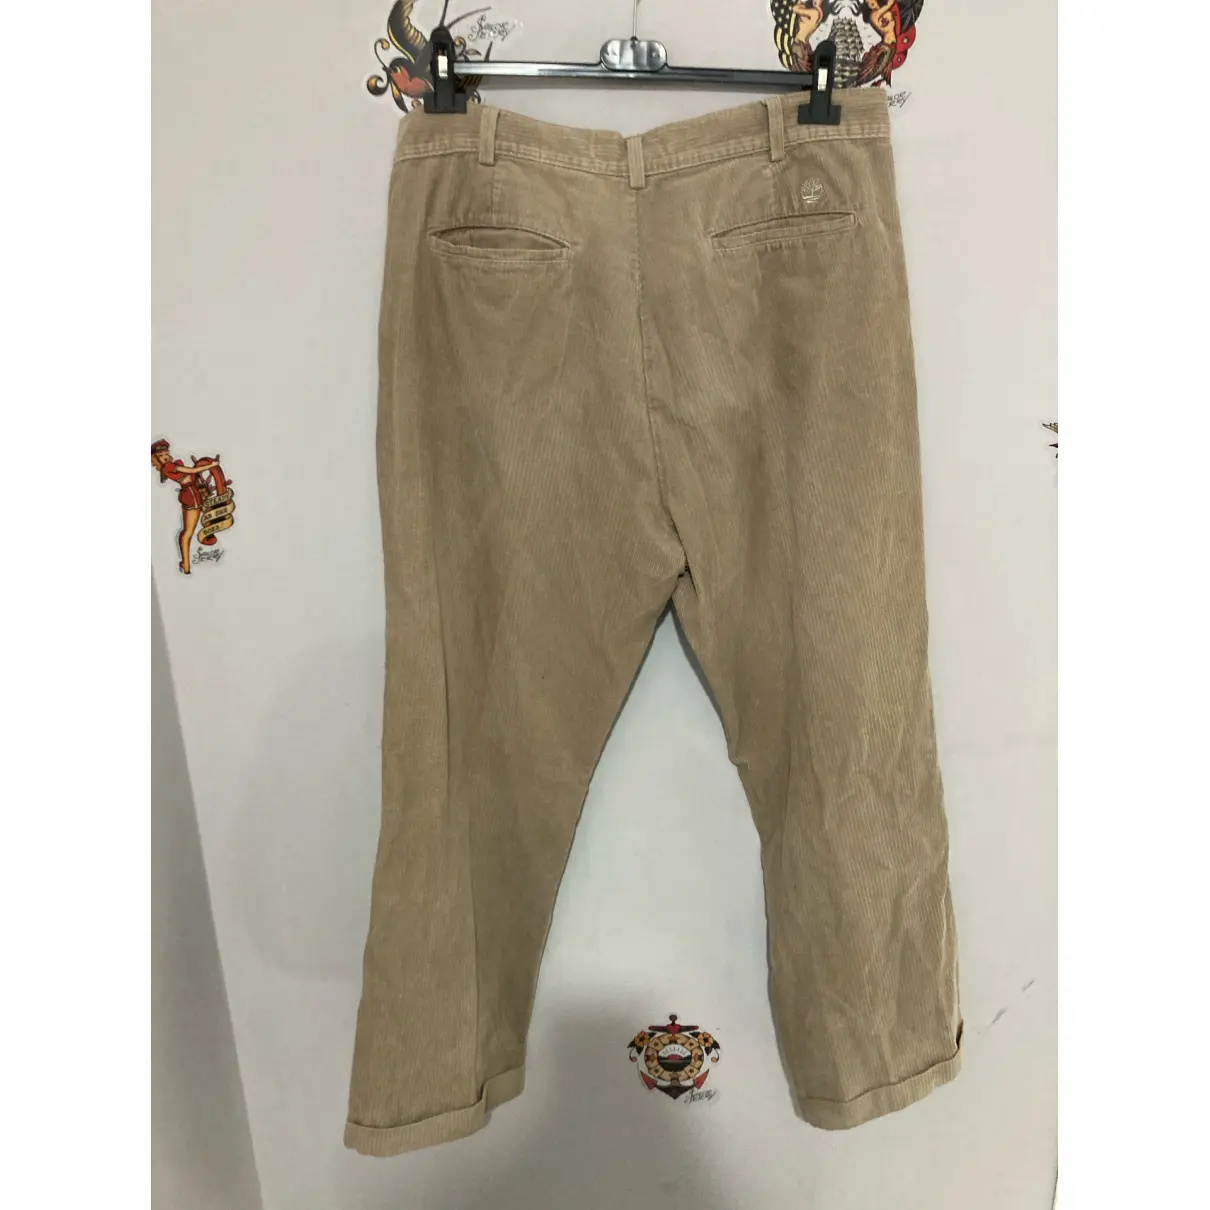 Buy Timberland Trousers online